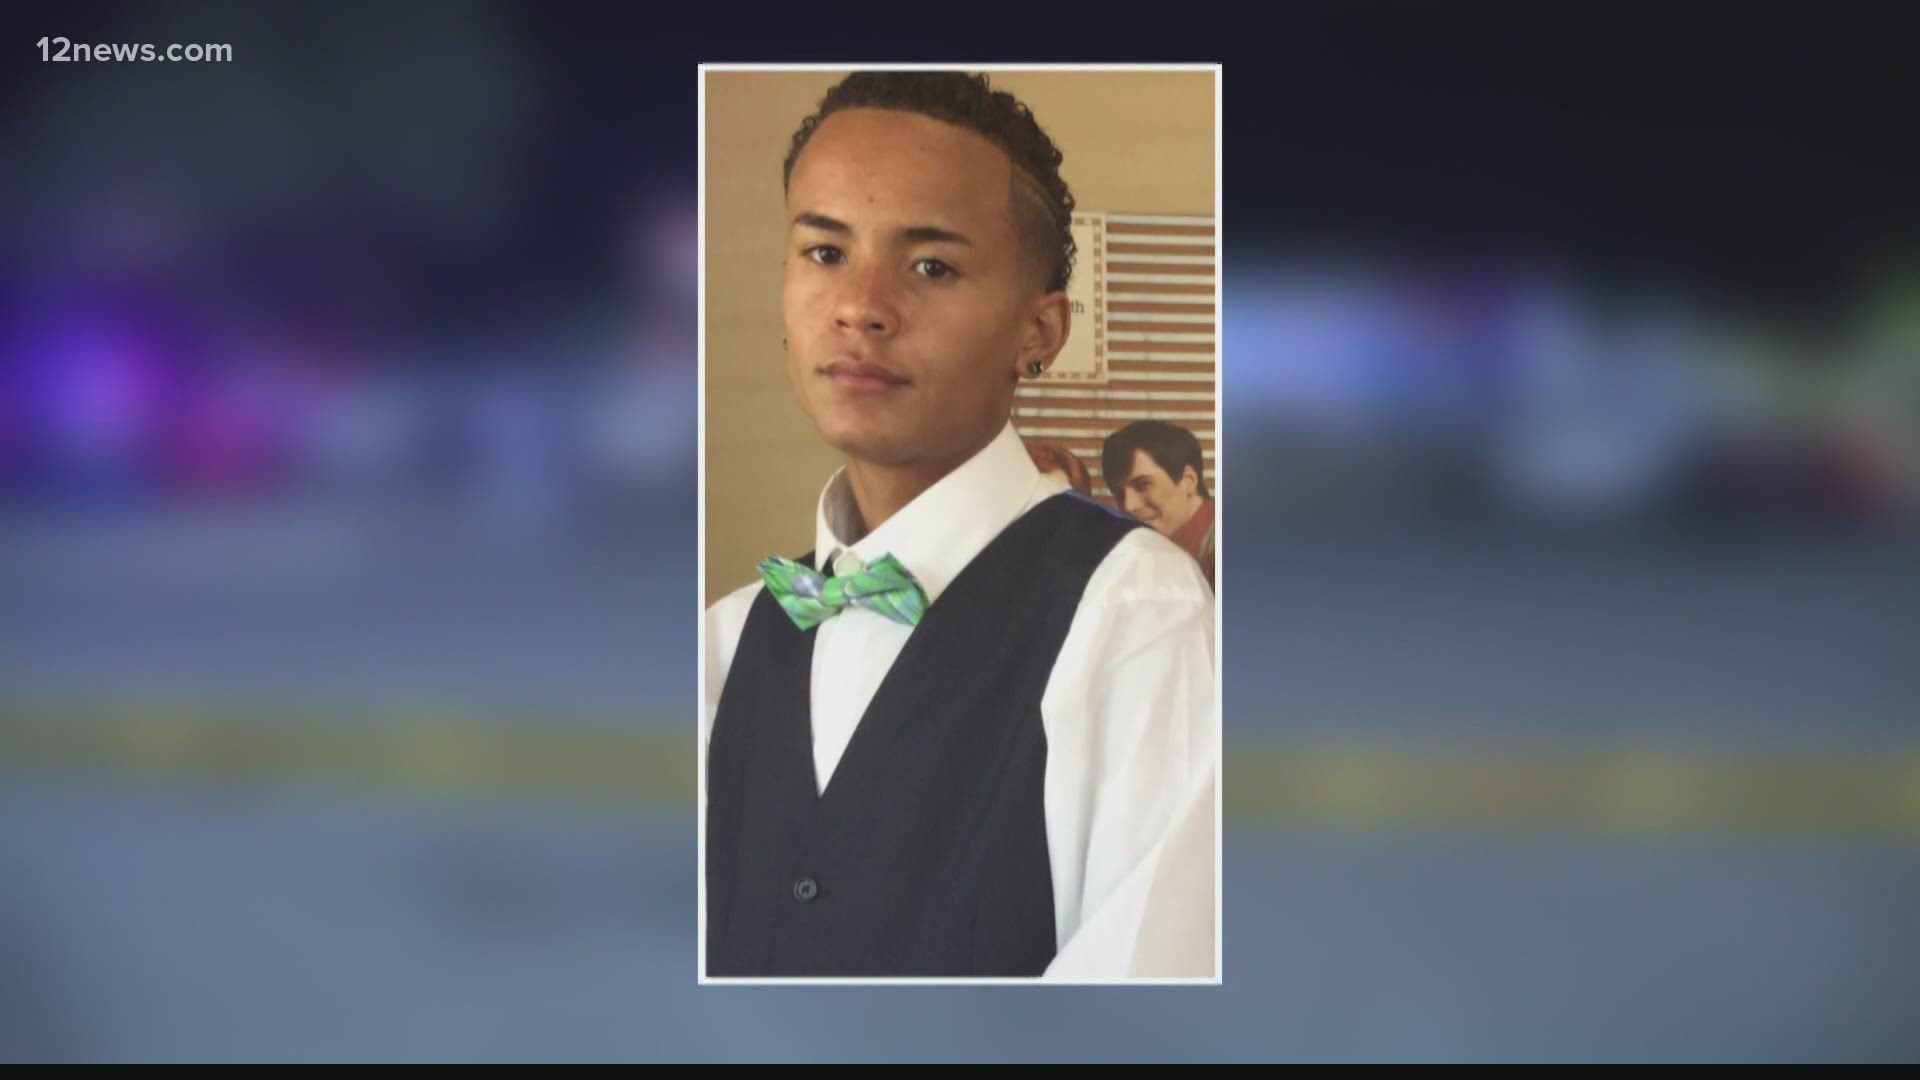 17-year-old Elijah Al-Amin was killed at a Circle K in Peoria two years ago. Two lawsuits are now blaming his death on the state's mental health system.